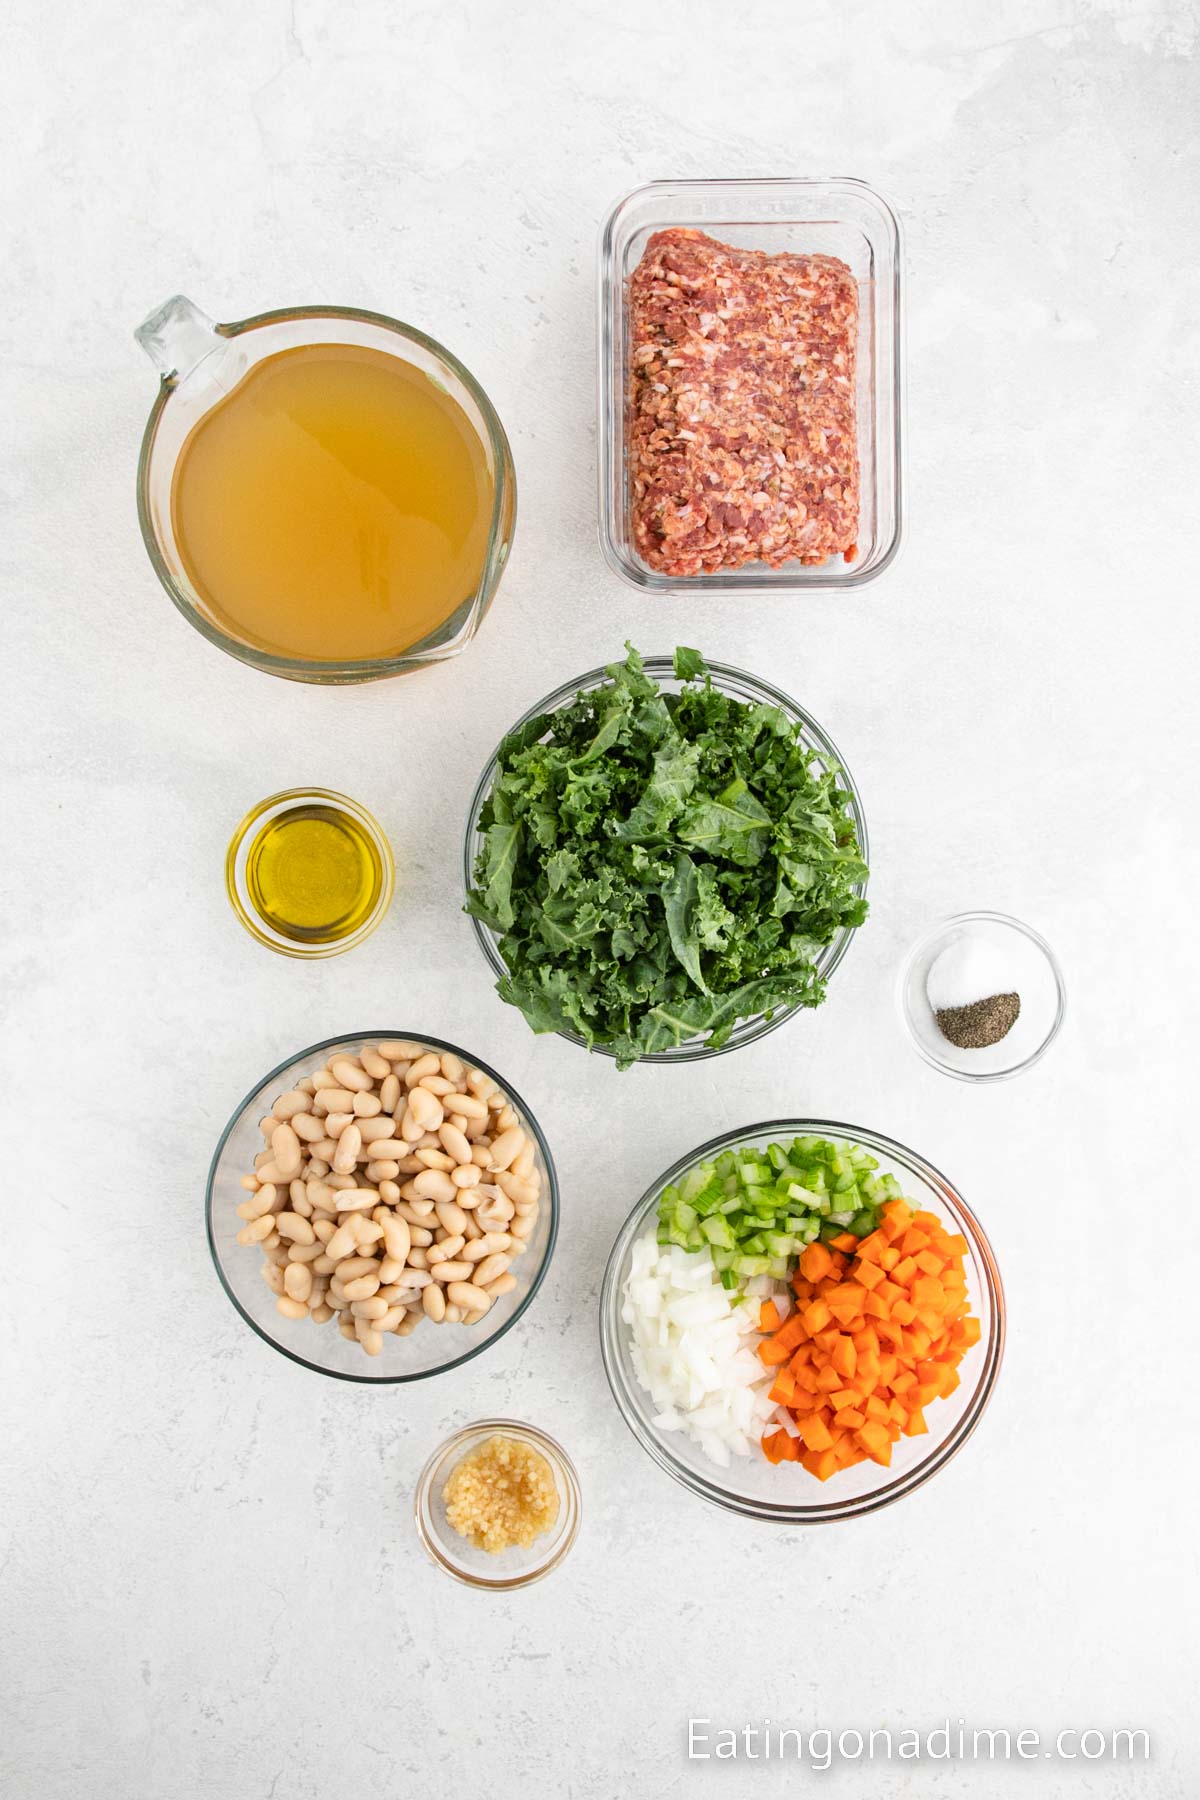 Olive oil, sausage, onion, celery, carrots, garlic, salt and pepper, beans, chicken broth, kale, parmesan cheese